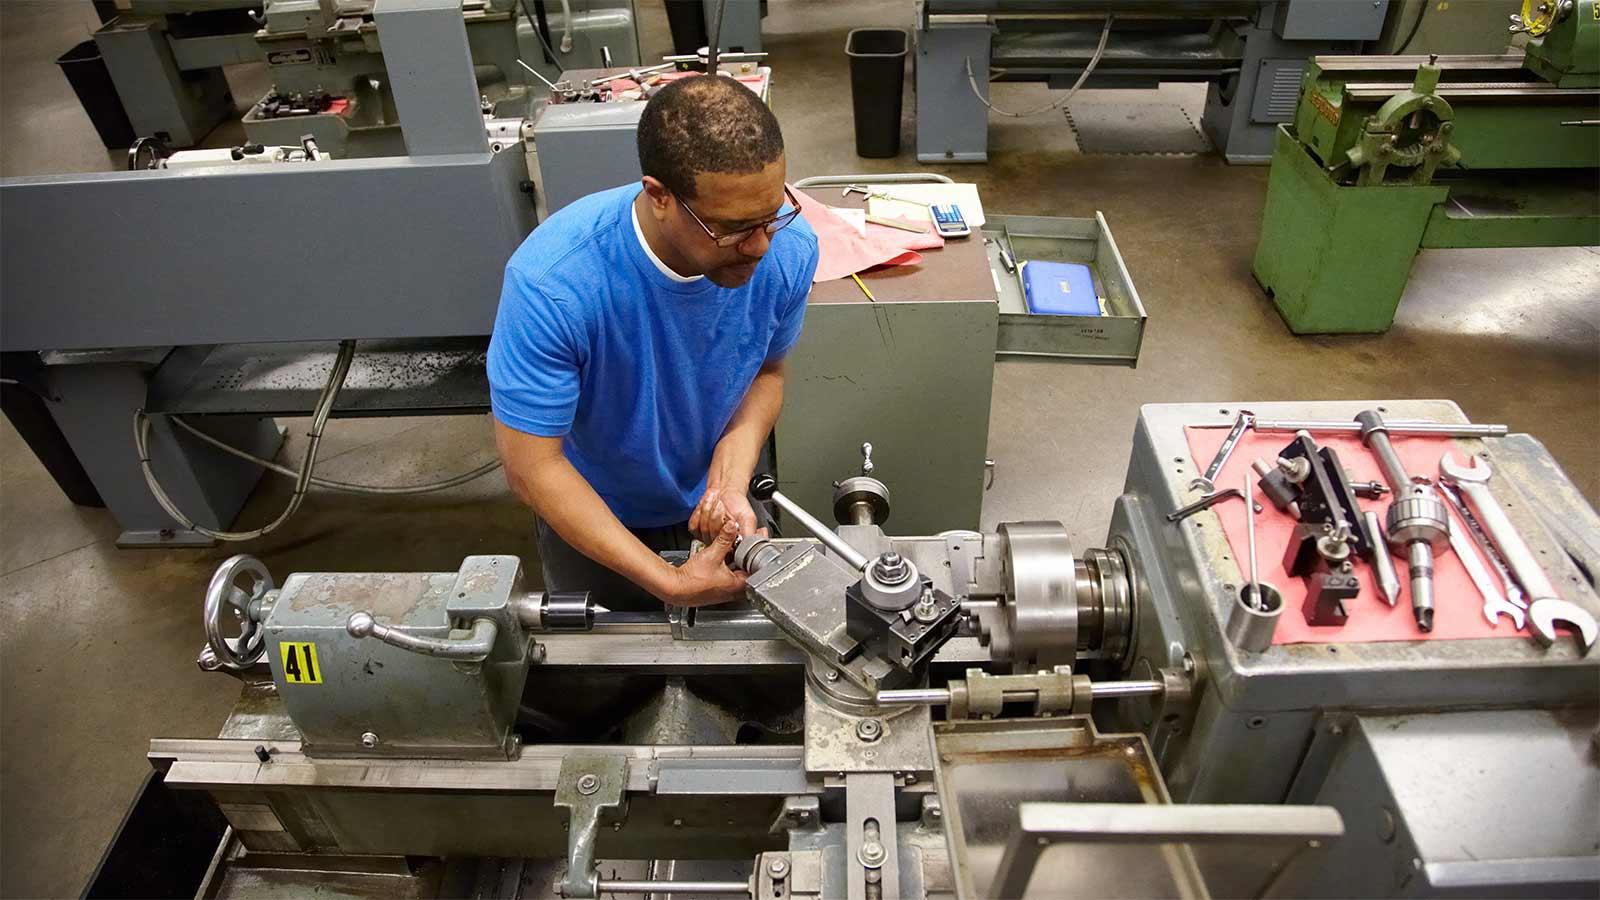 Student working a lathe in a machine shop